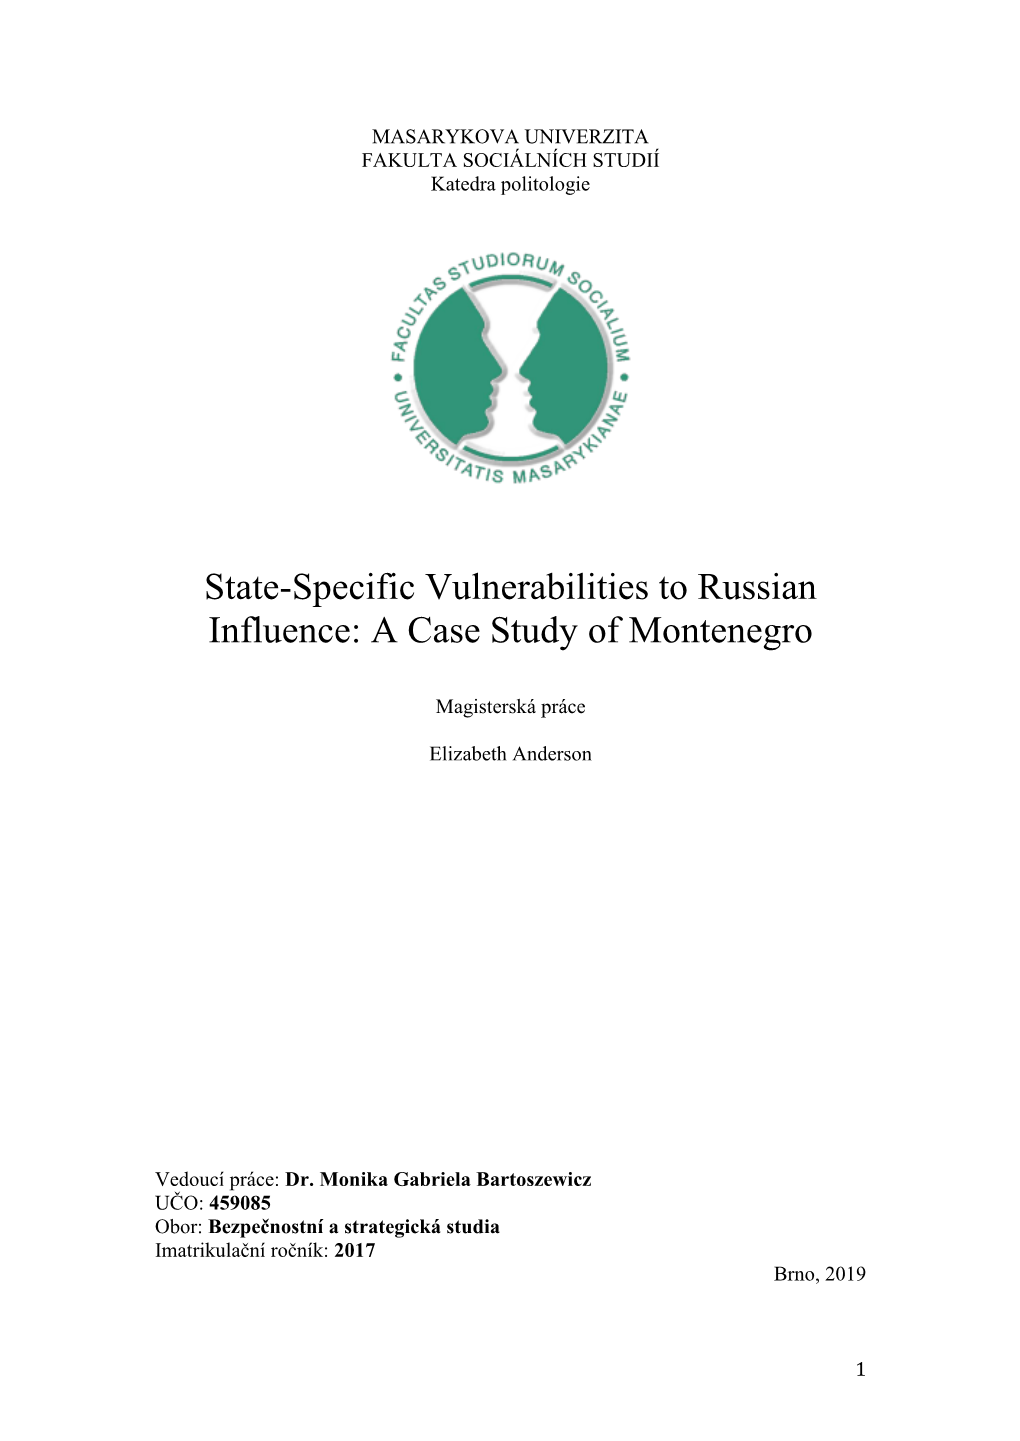 State-Specific Vulnerabilities to Russian Influence: a Case Study of Montenegro